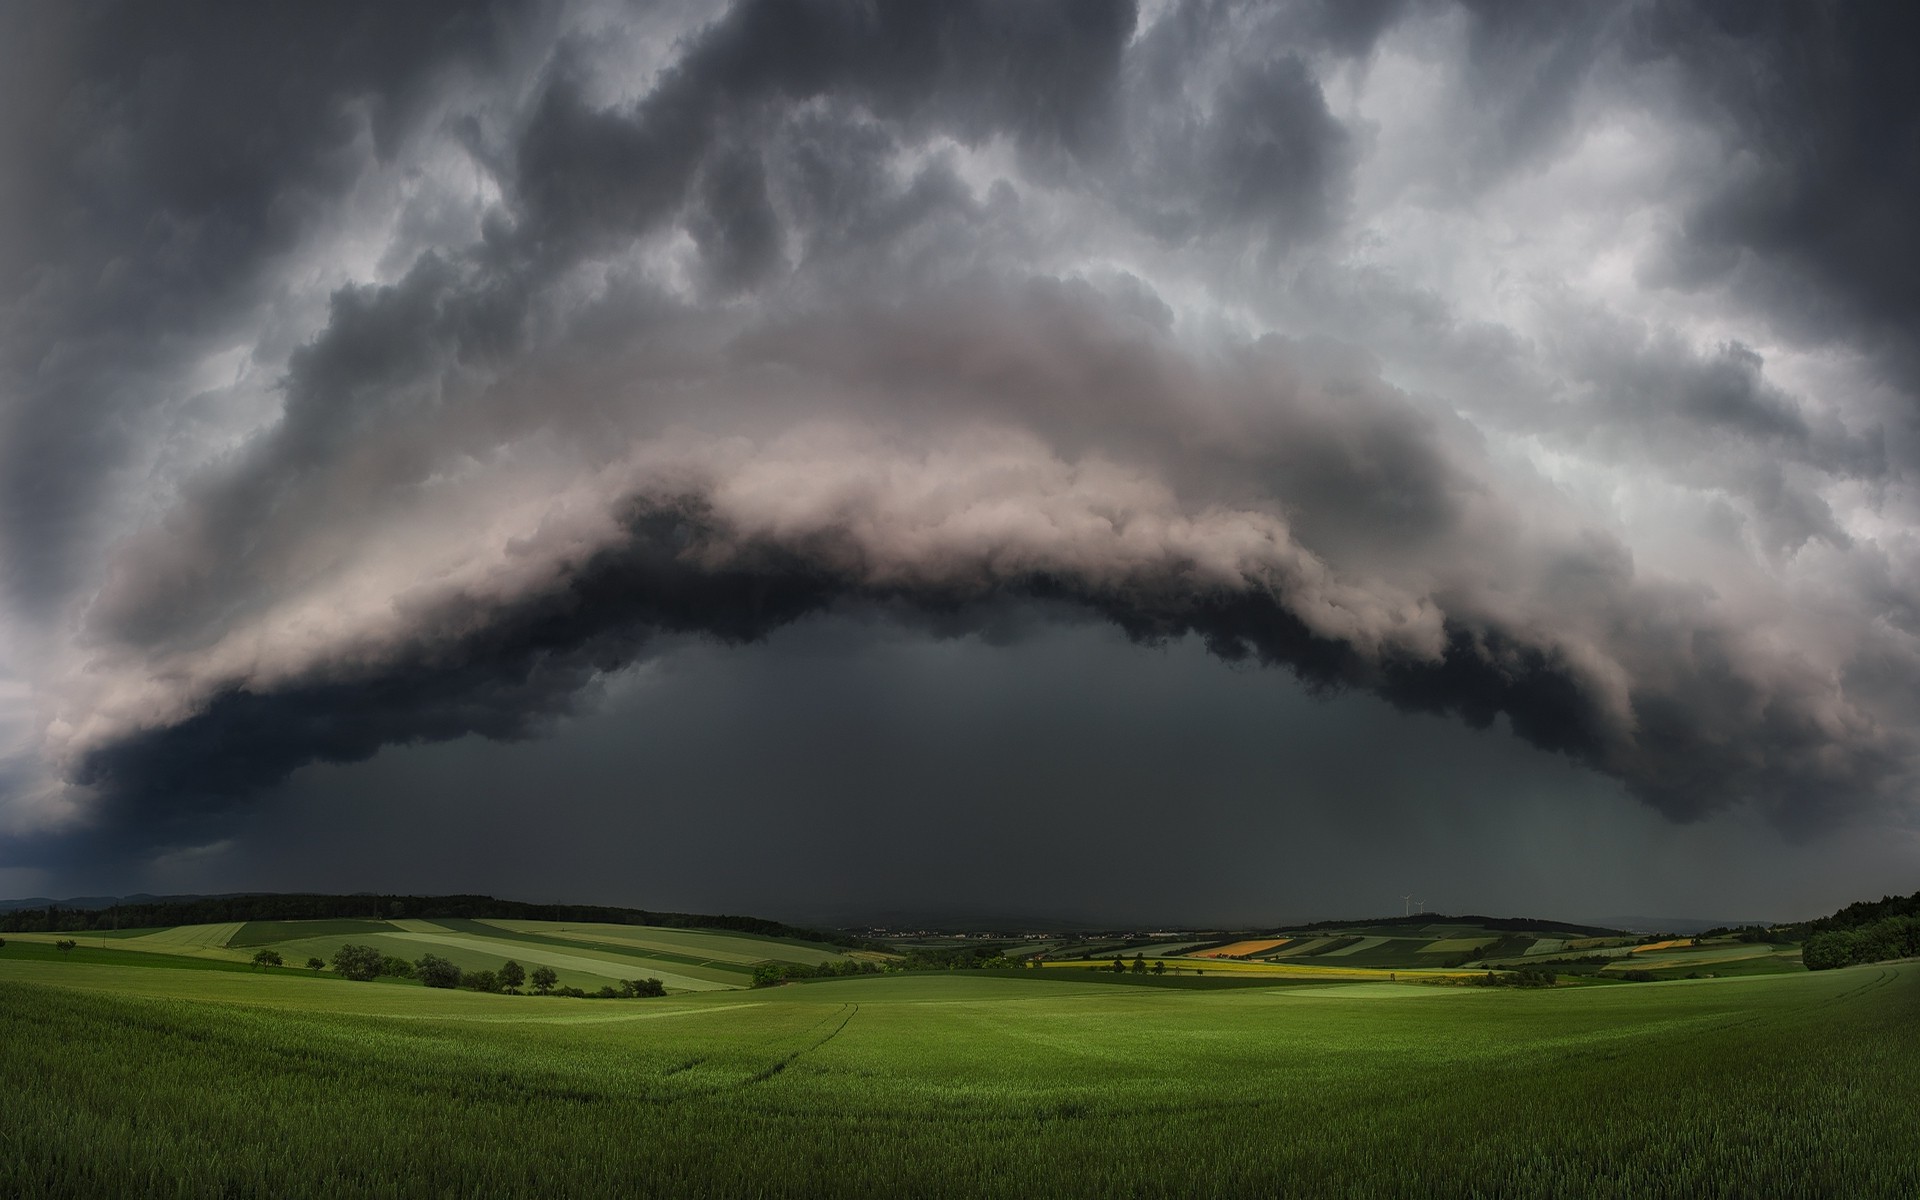 nature, Landscape, Supercell, Storm, Clouds, Field, Hill, Thunder